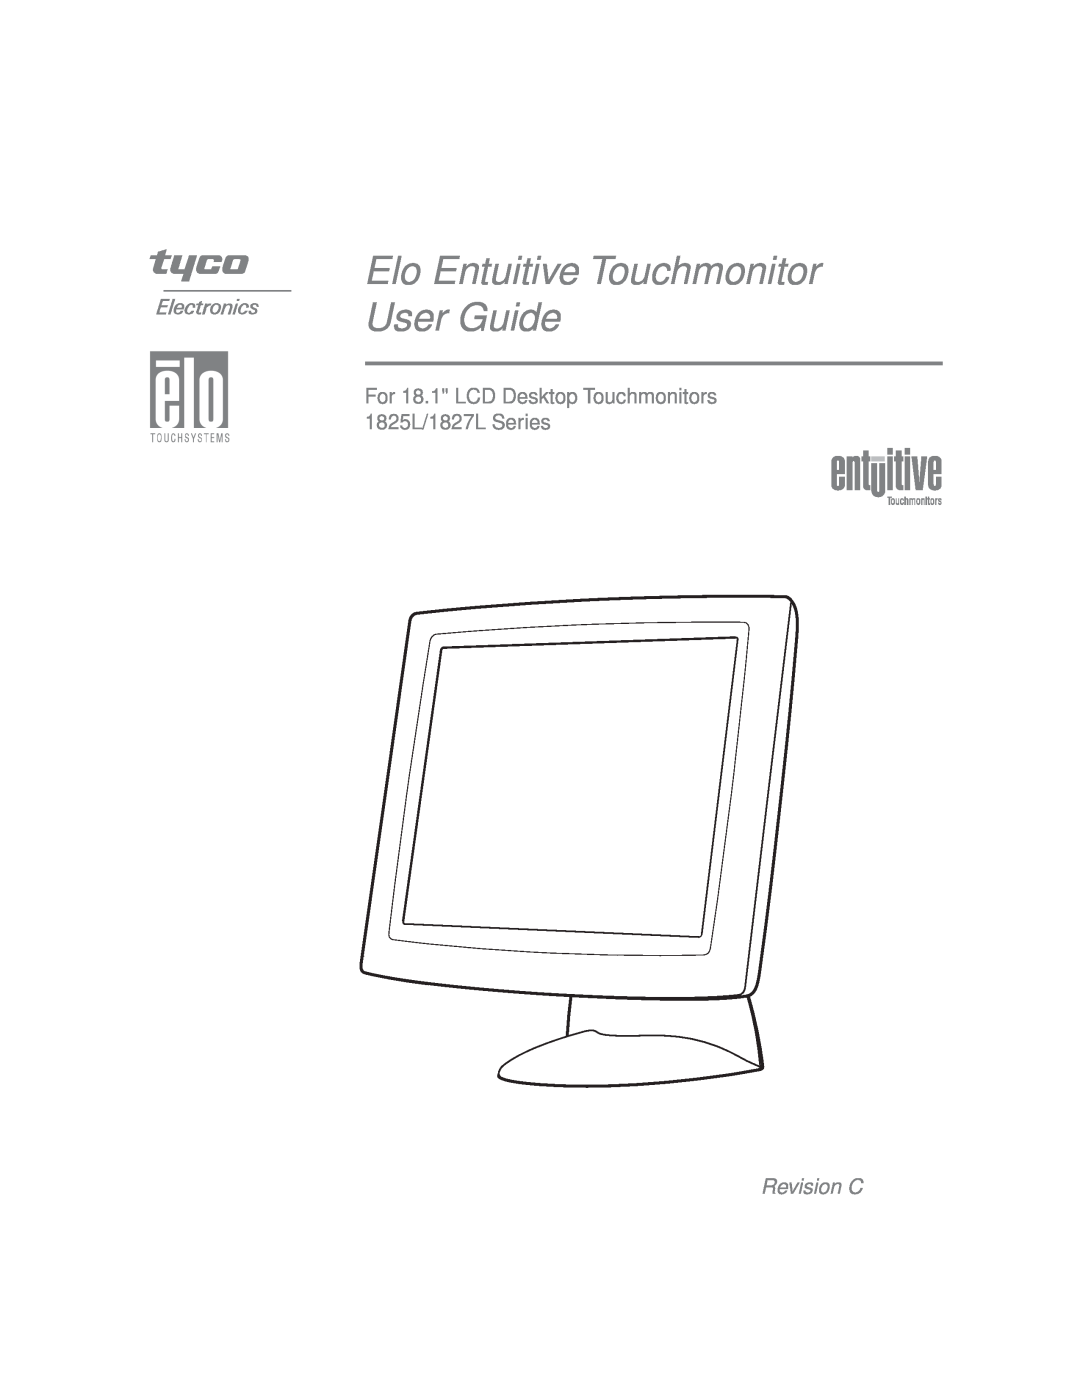 Elo TouchSystems manual Elo Entuitive Touchmonitor User Guide, For 18.1 LCD Desktop Touchmonitors 1825L/1827L Series 